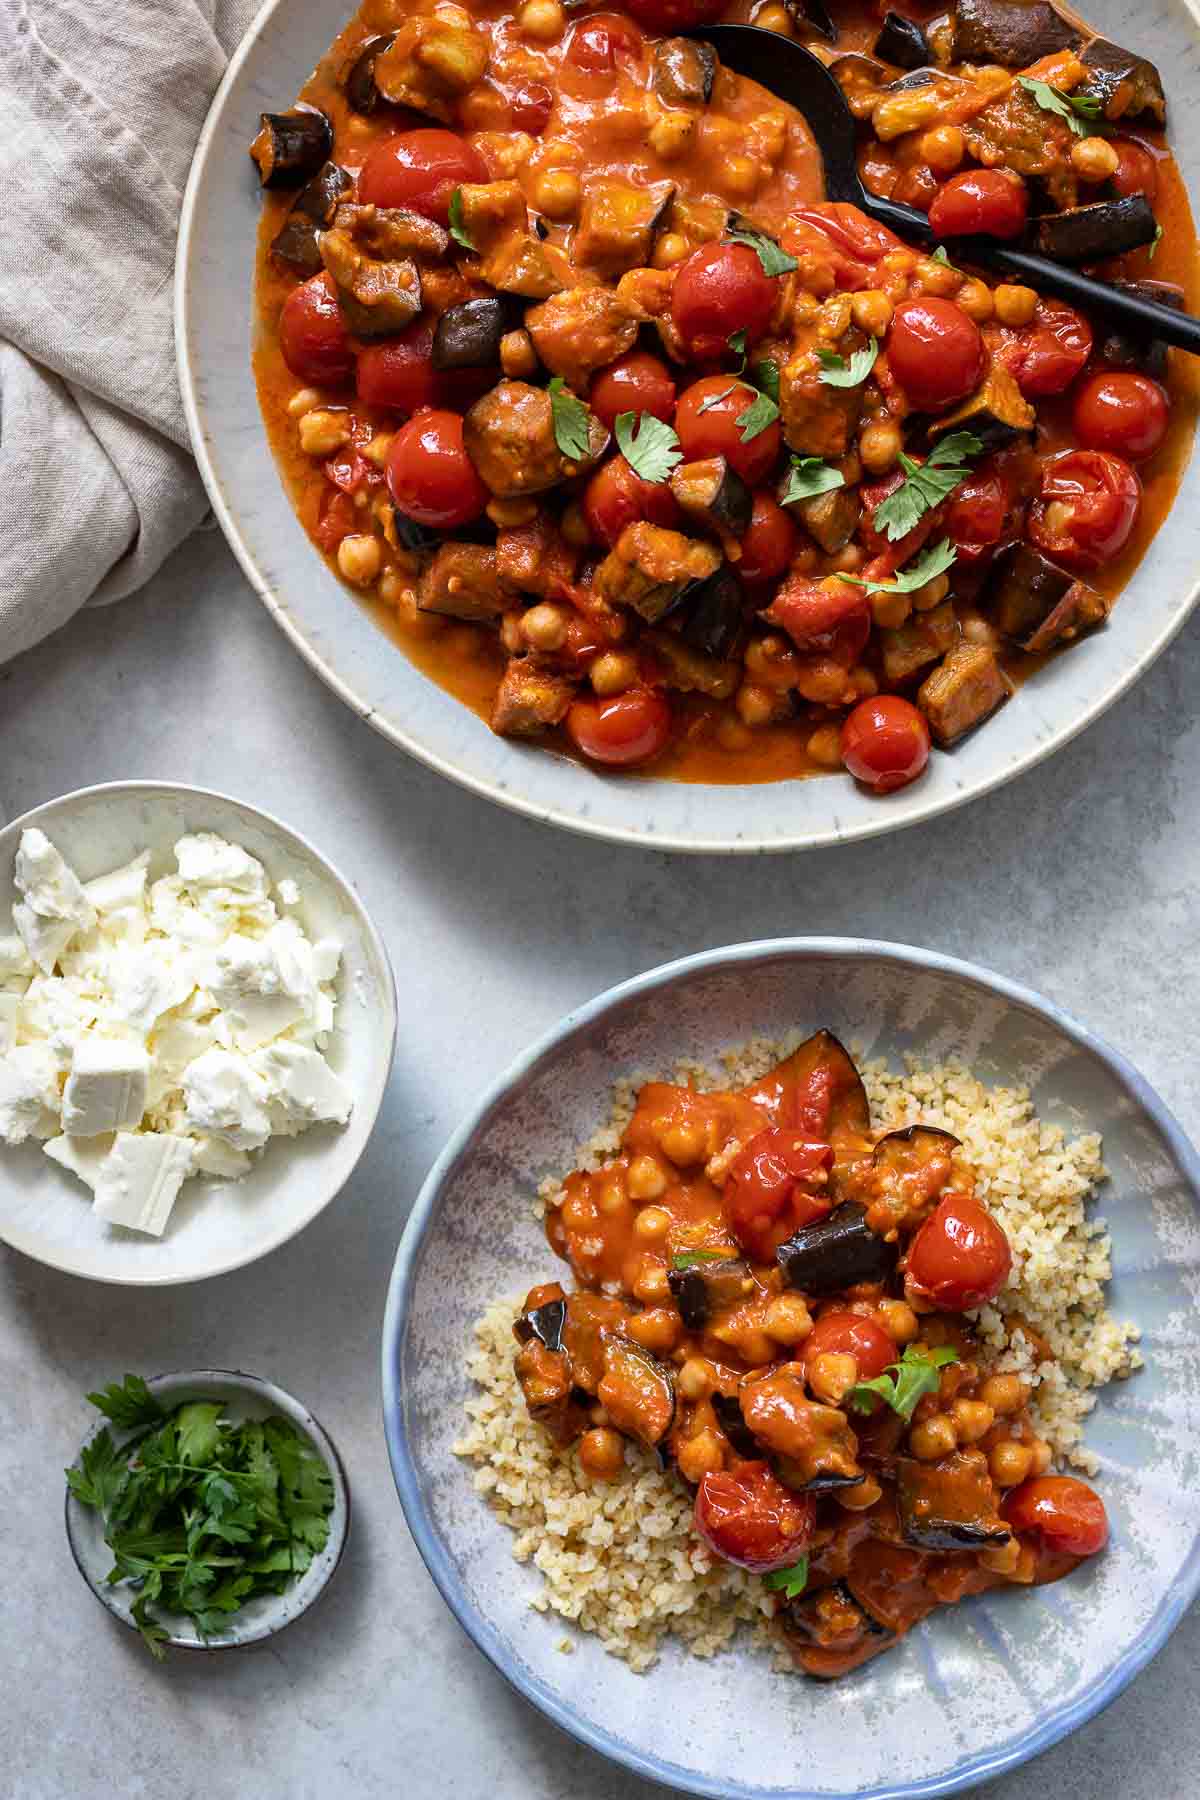 Eggplant and tomato stew with chickpeas, tomato and harissa spice served with bulgur and feta cheese